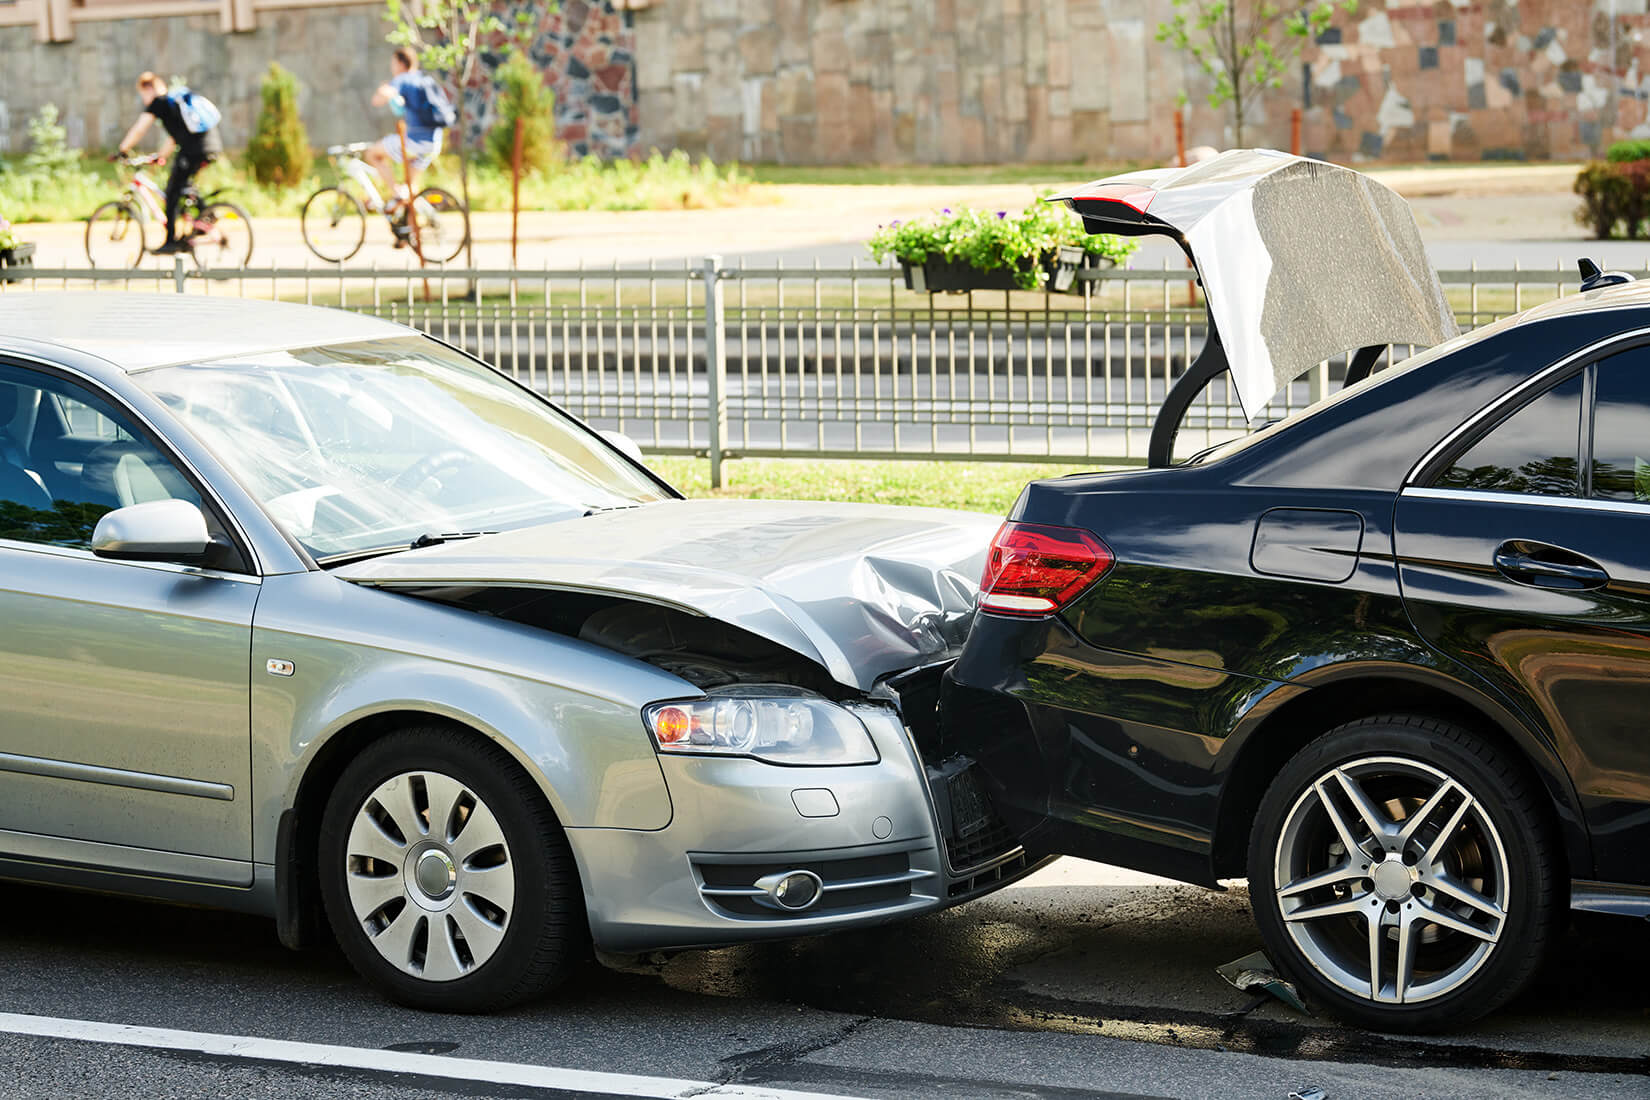 When an auto accident requires injury chiropractic treatment